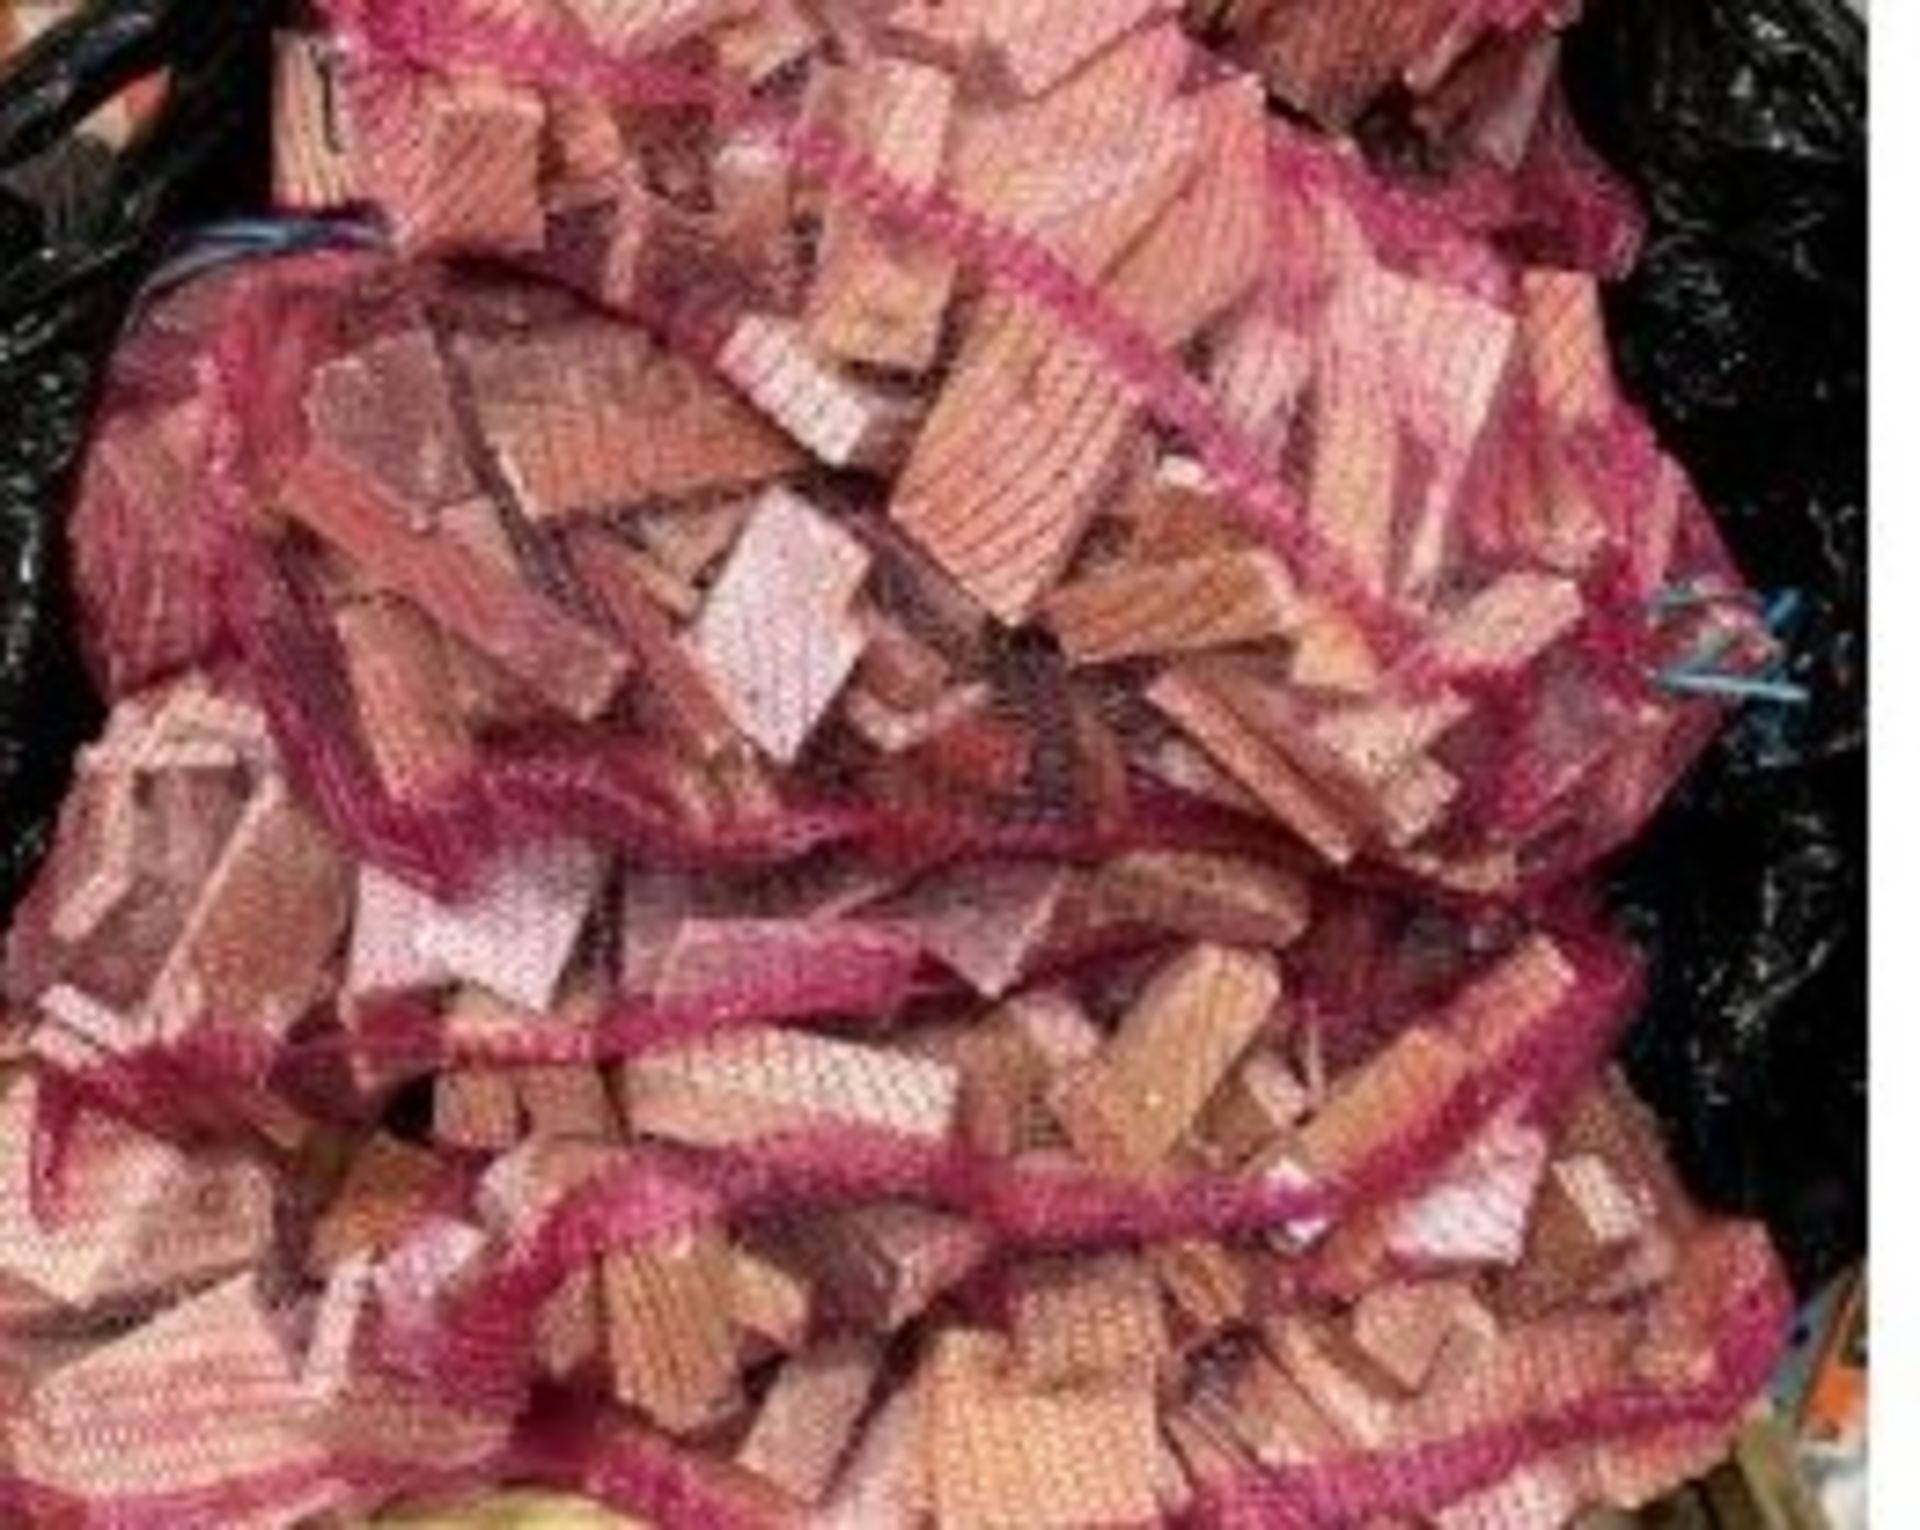 Pallet of Nettled Wood Suitable for Outdoor Fire Pit